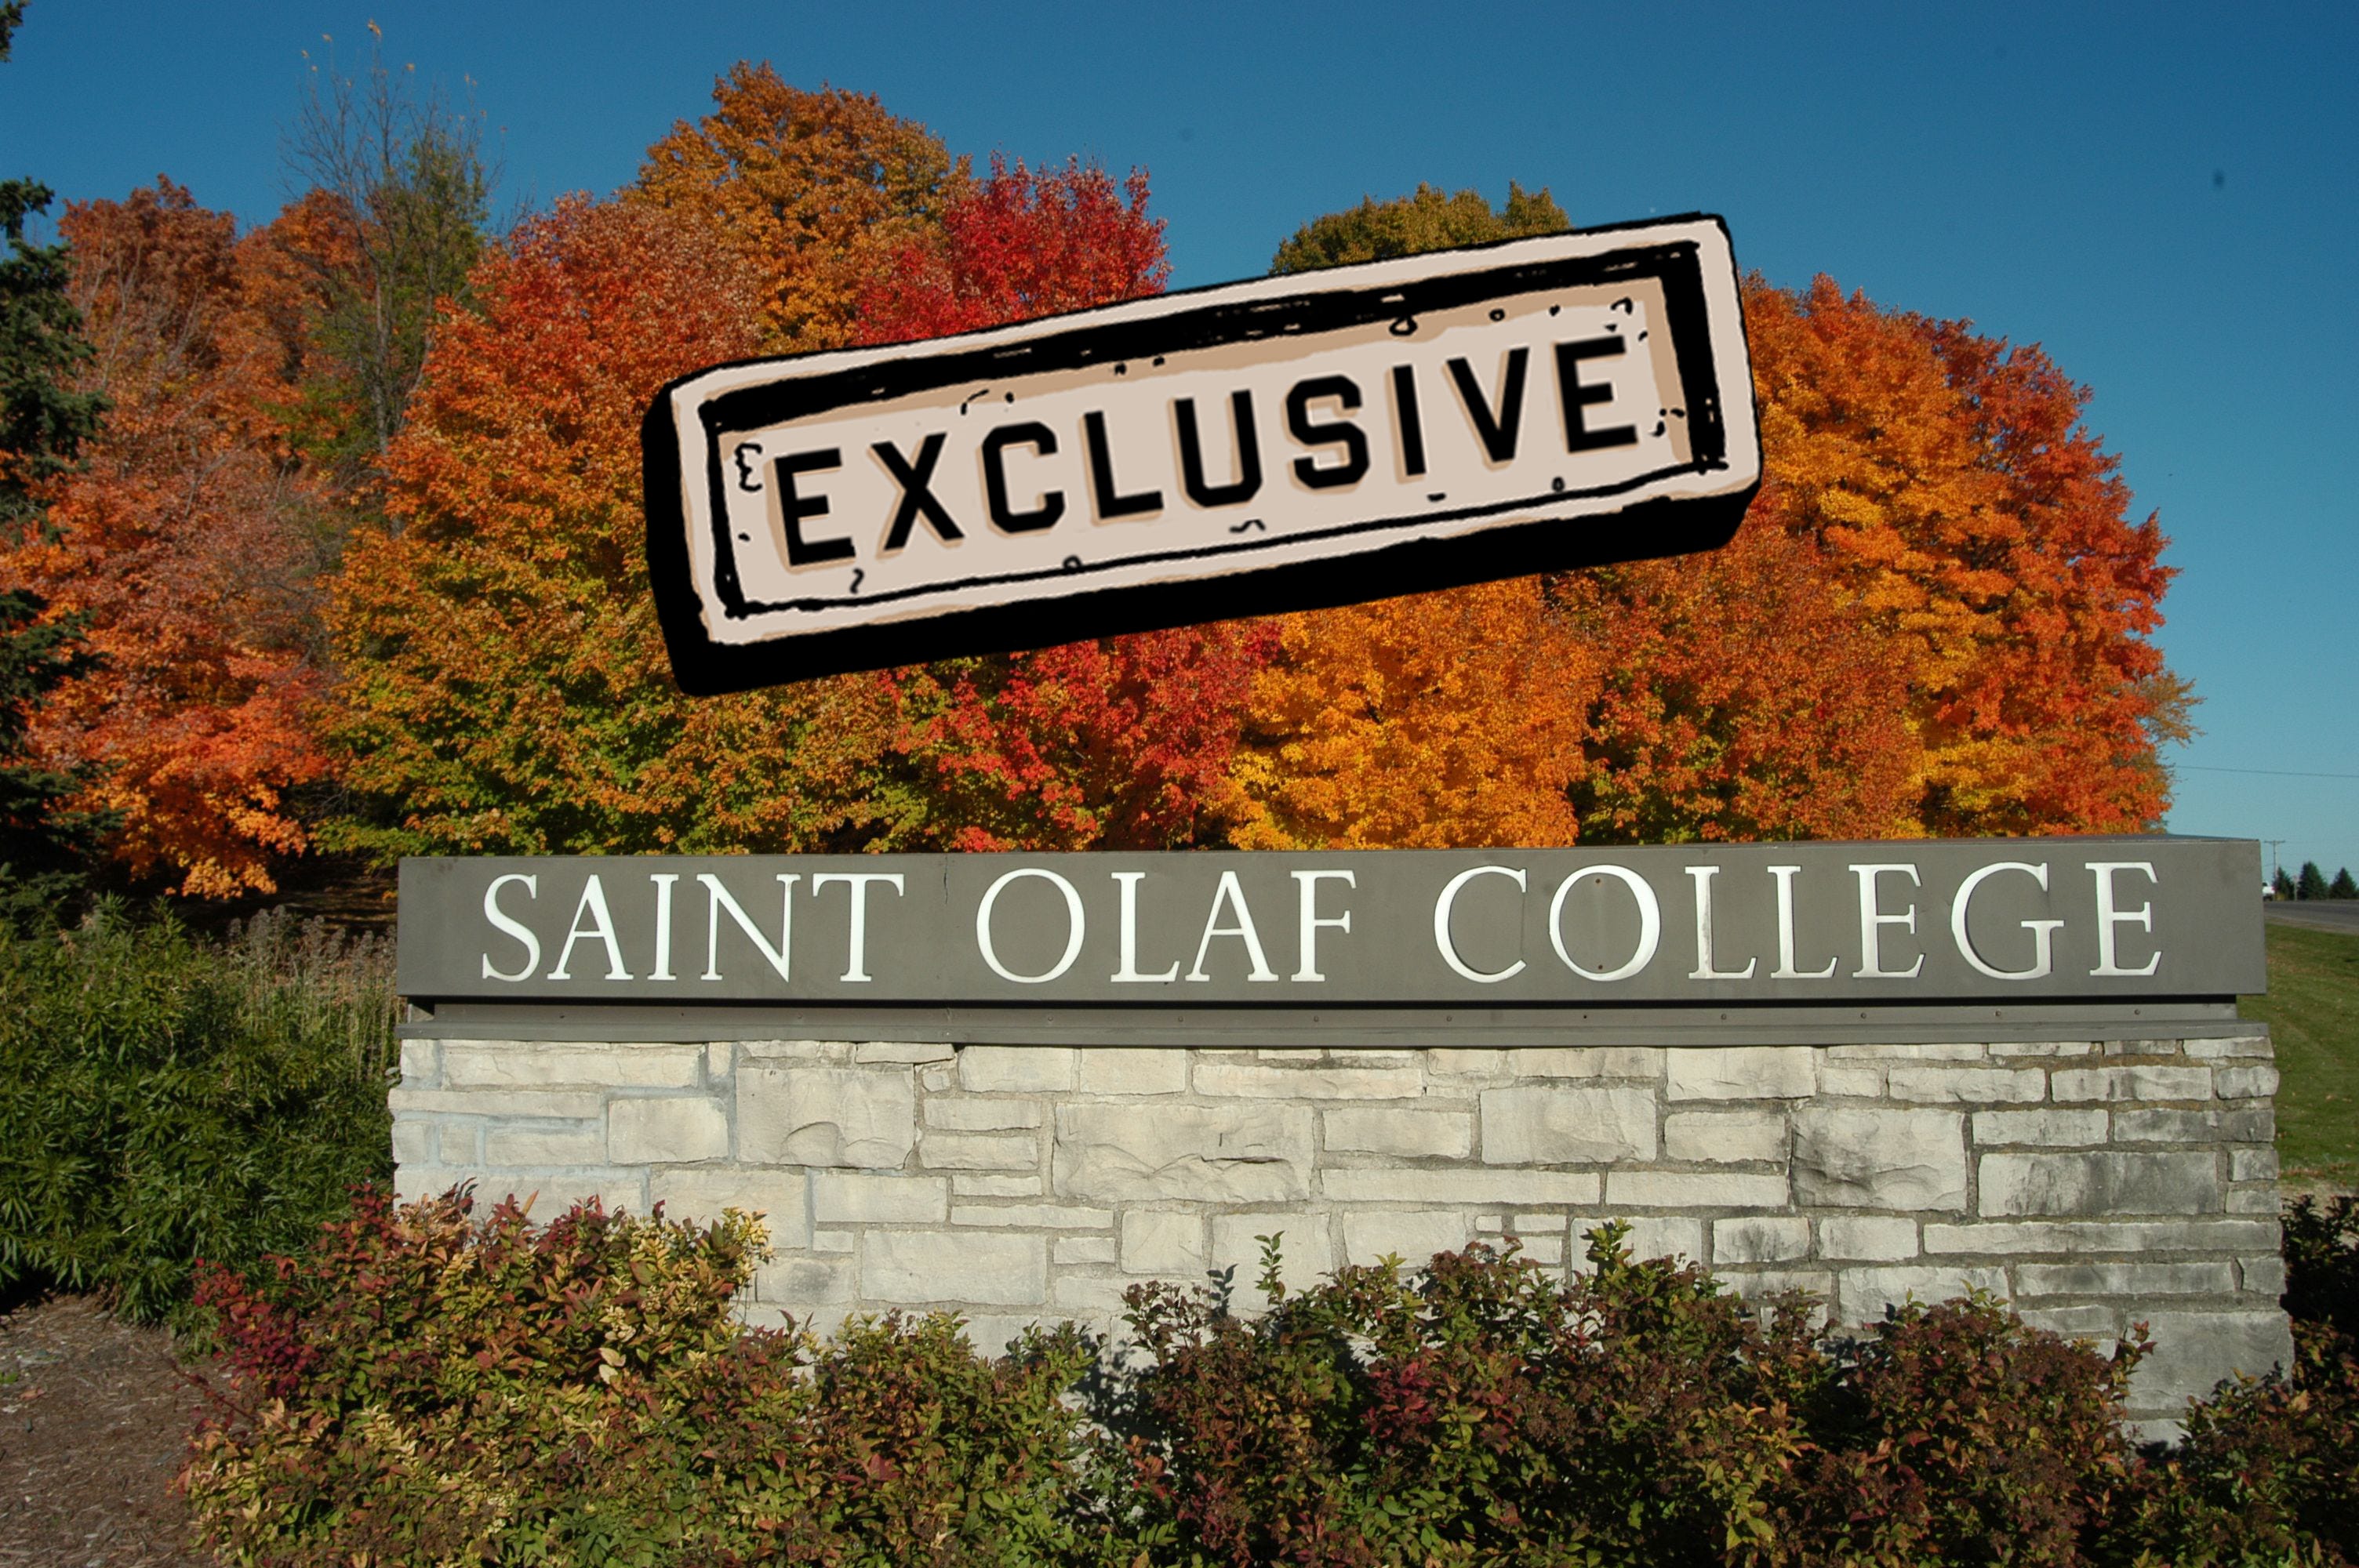 EXCLUSIVE INTERVIEW: St. Olaf College Punishes Professor for Inviting Peter Singer to Campus